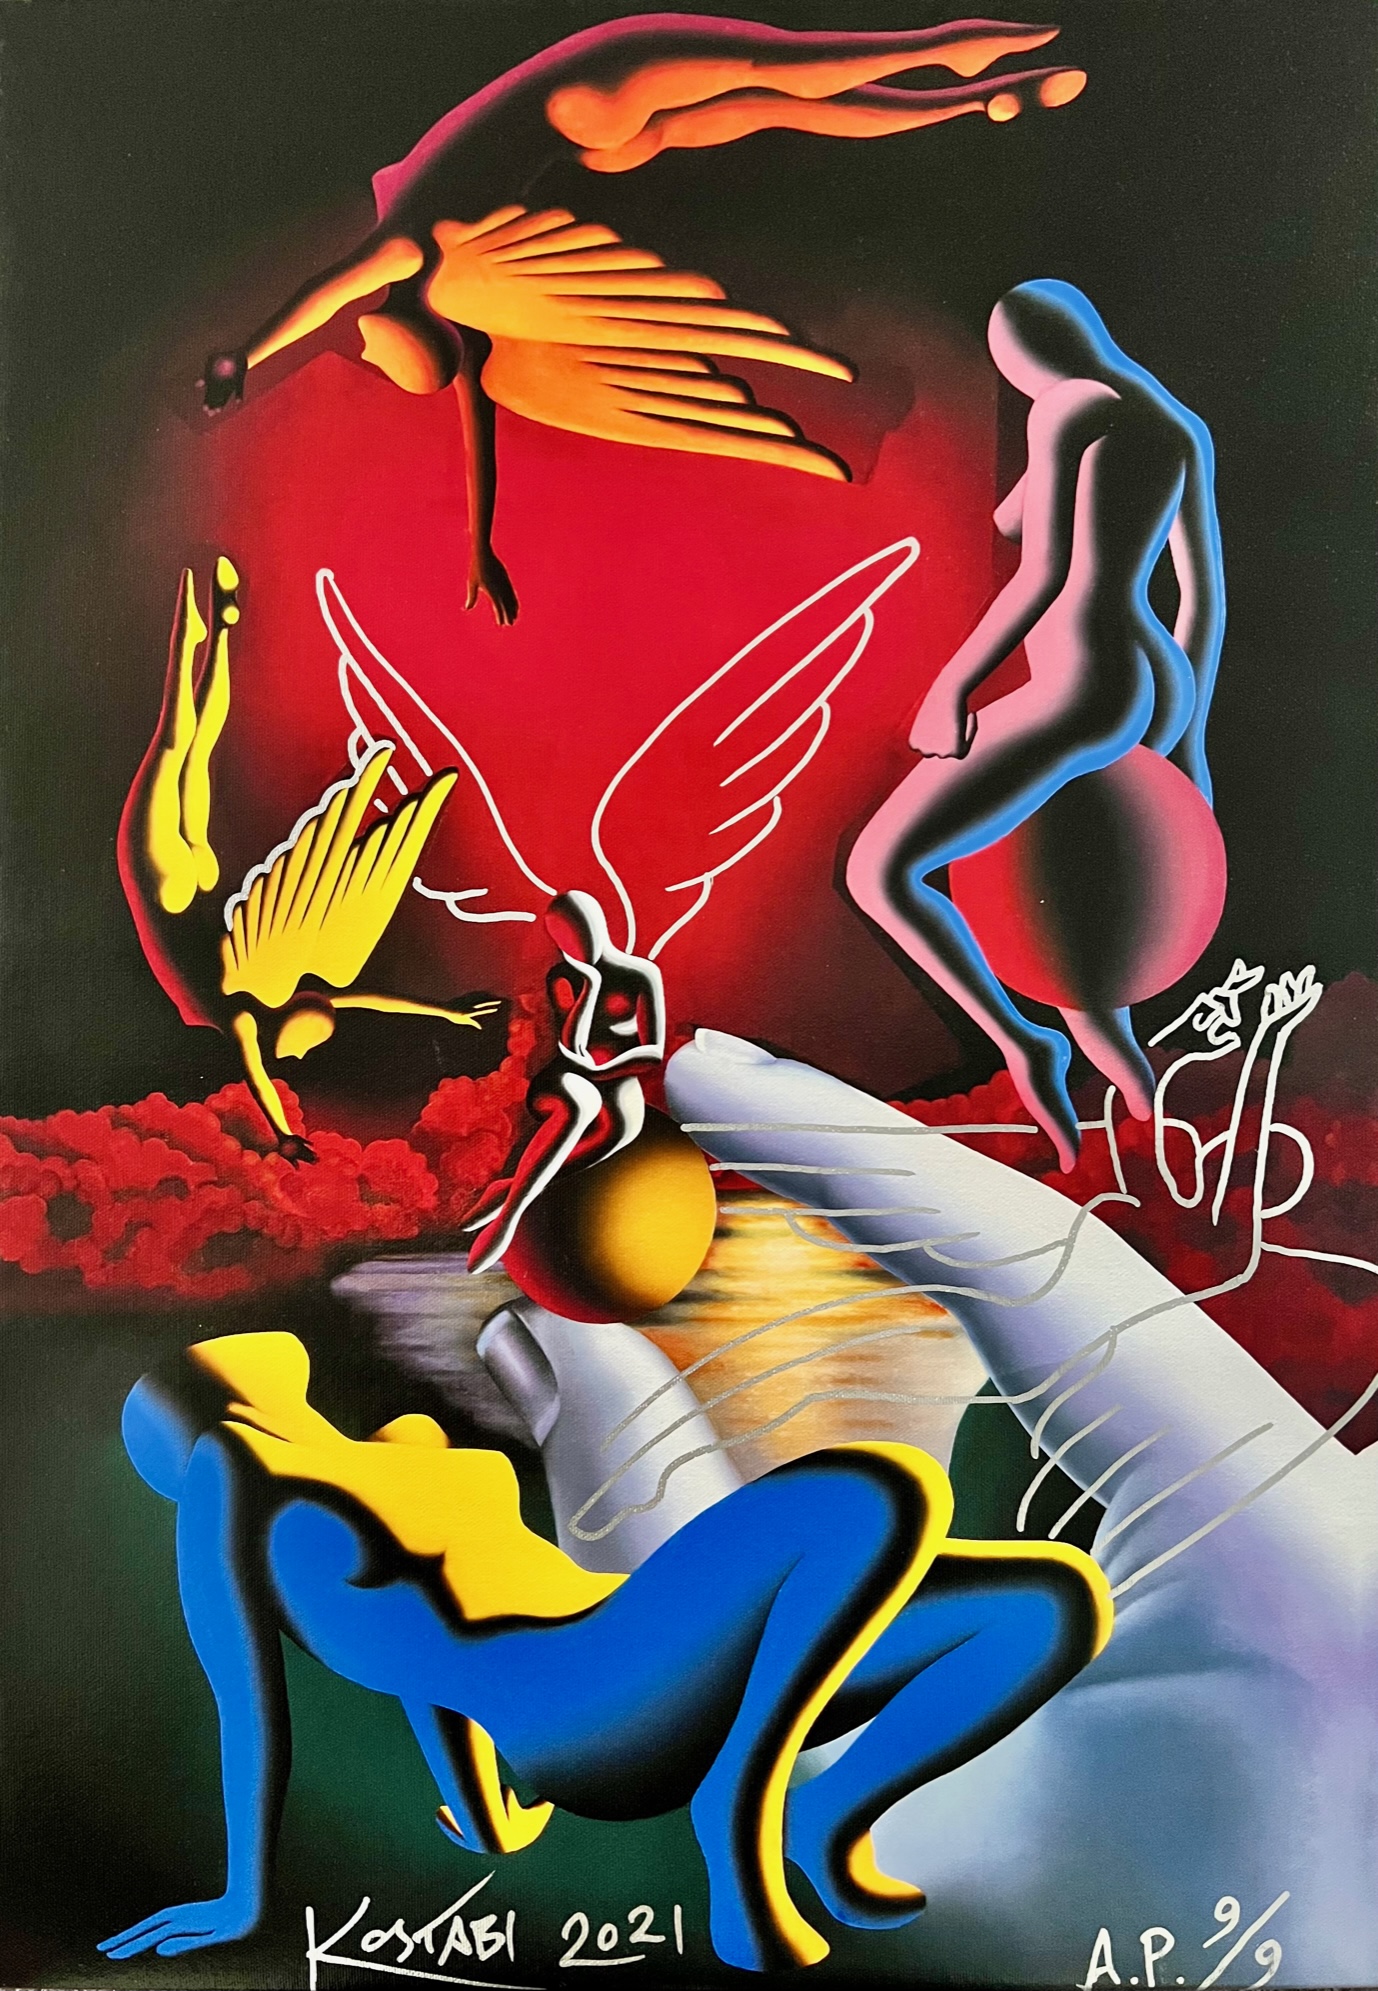 MARK KOSTABI - The Mysticism of Infinity - Limited Edition Giclee on Canvas w/ Oil Pen - 17.5 x 25 inches